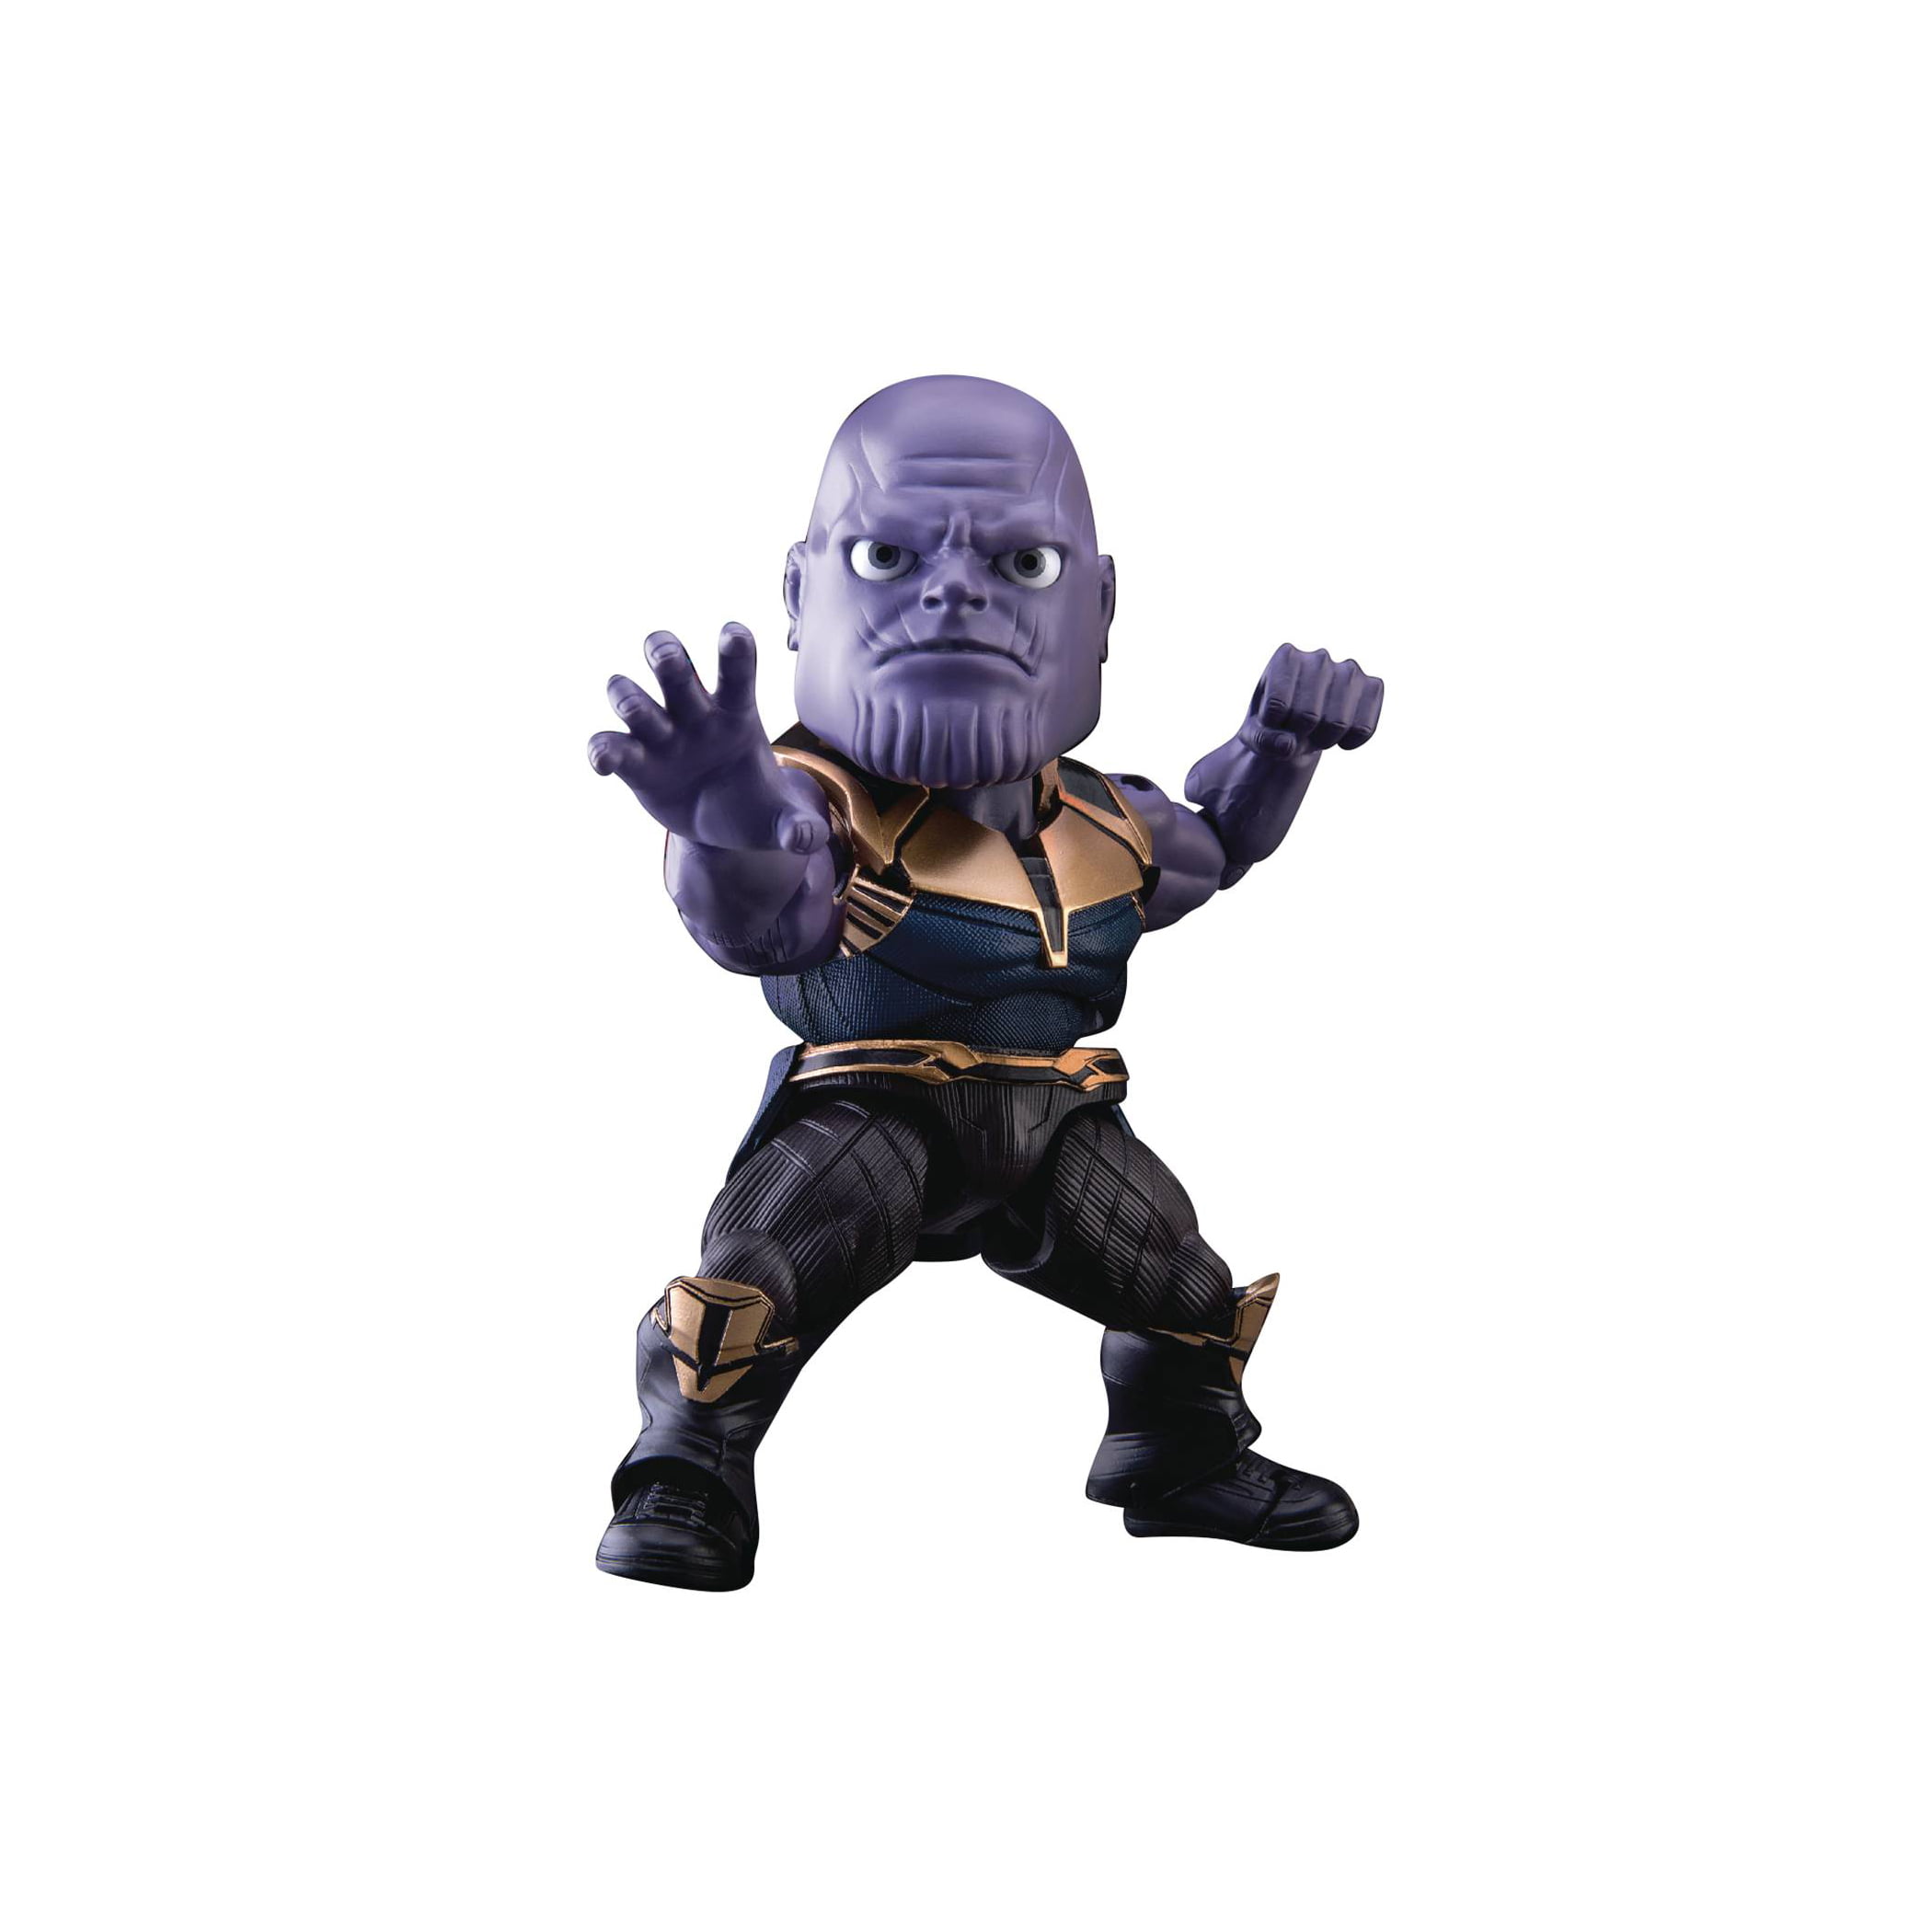 Beast Kingdom Marvel Infinity War Thanos Eaa-059 Action Figure for sale online 